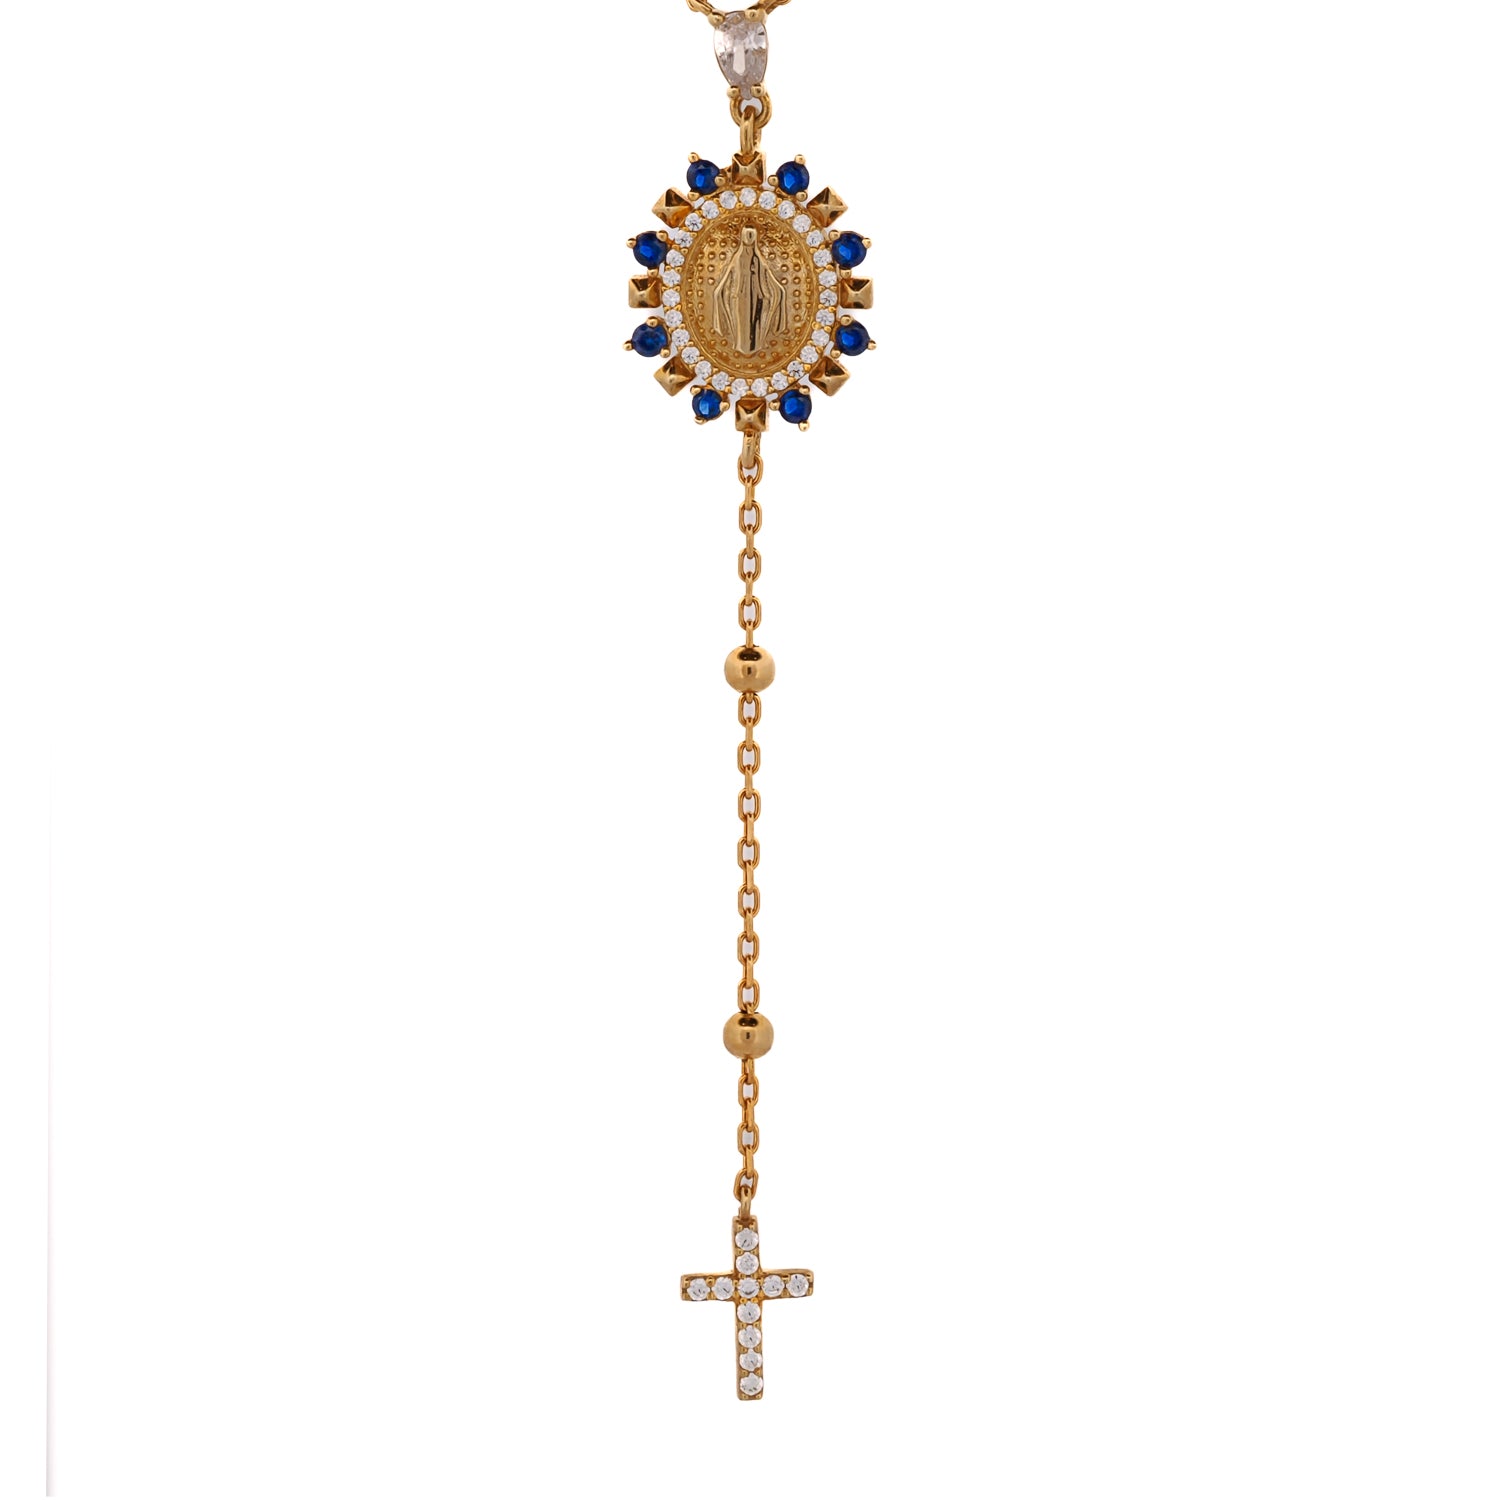 Elegant Gold Chain Necklace with Sapphire and Diamond Virgin Mary Pendant